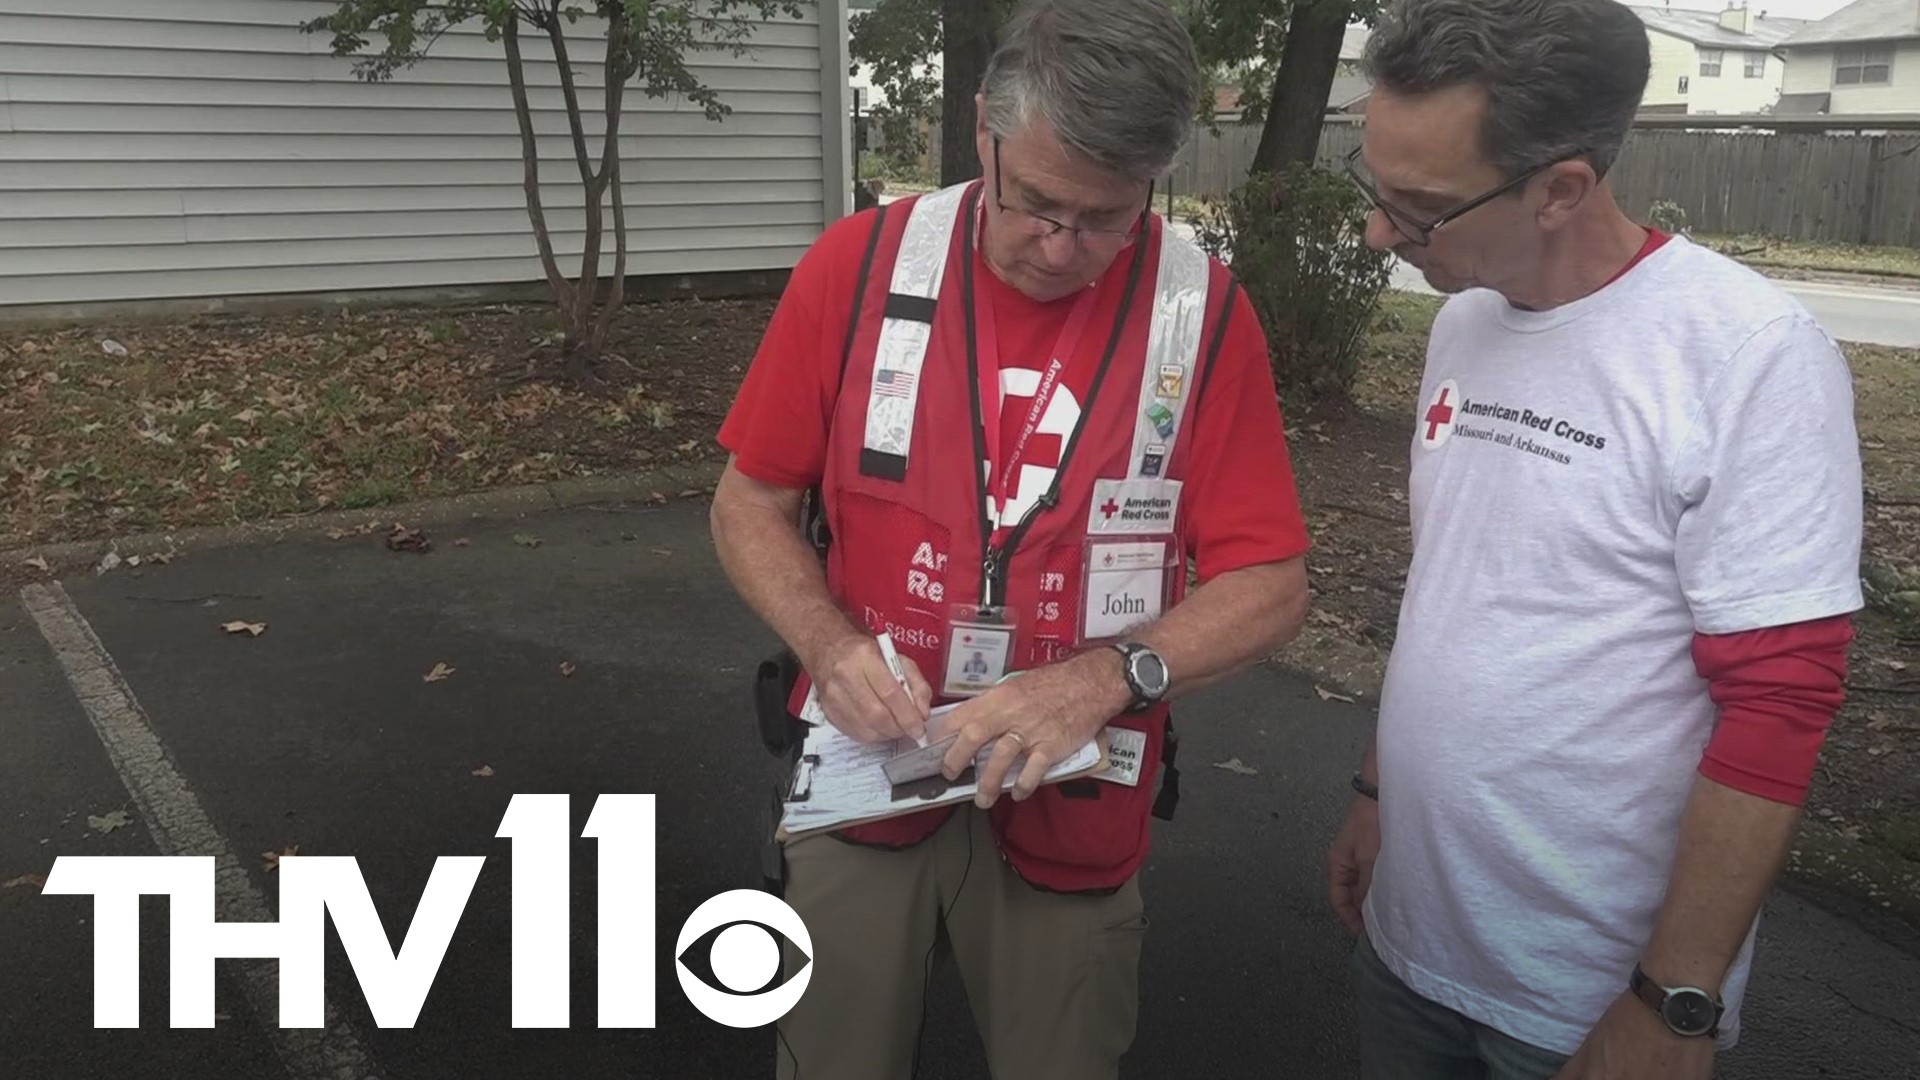 Little Rock is continuing to recover after Wednesday’s storm, and the Red Cross disaster team is now going door-to-door helping those with some of the worst damage.